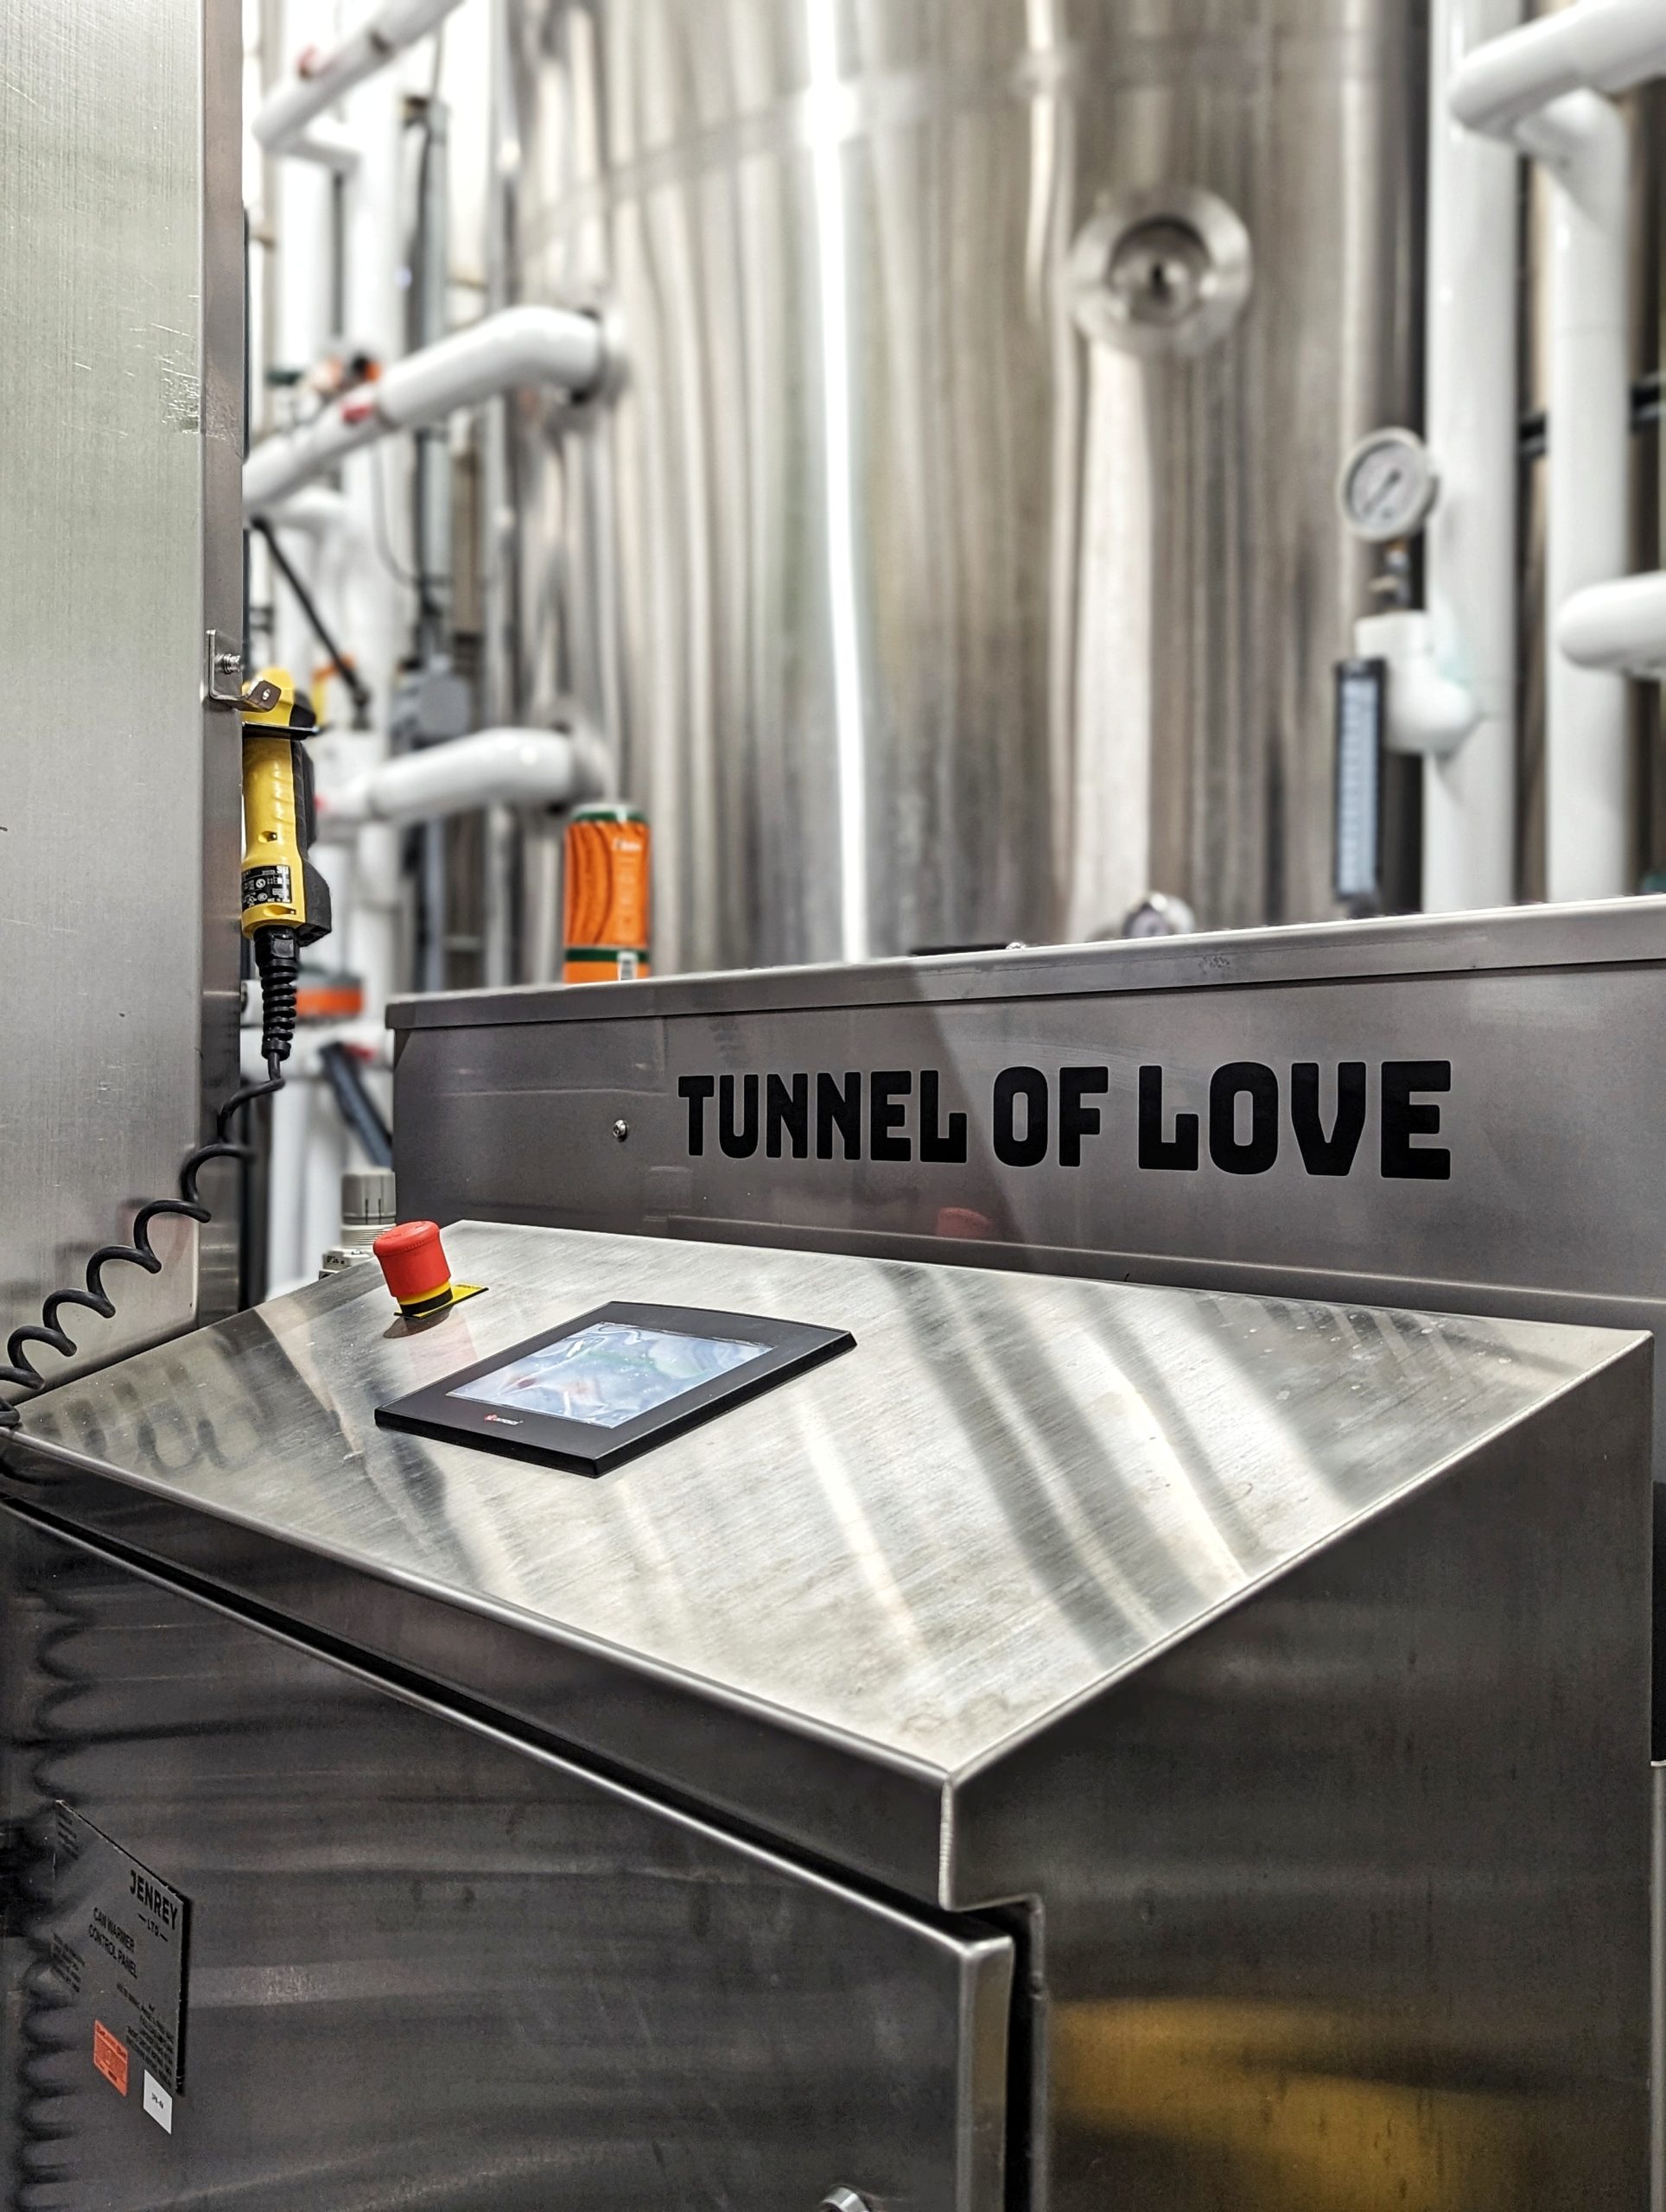 Our Tunnel of Love Craft Can Warmer is designed and built to significantly reduce and eliminate moisture and condensation on cans after filling.